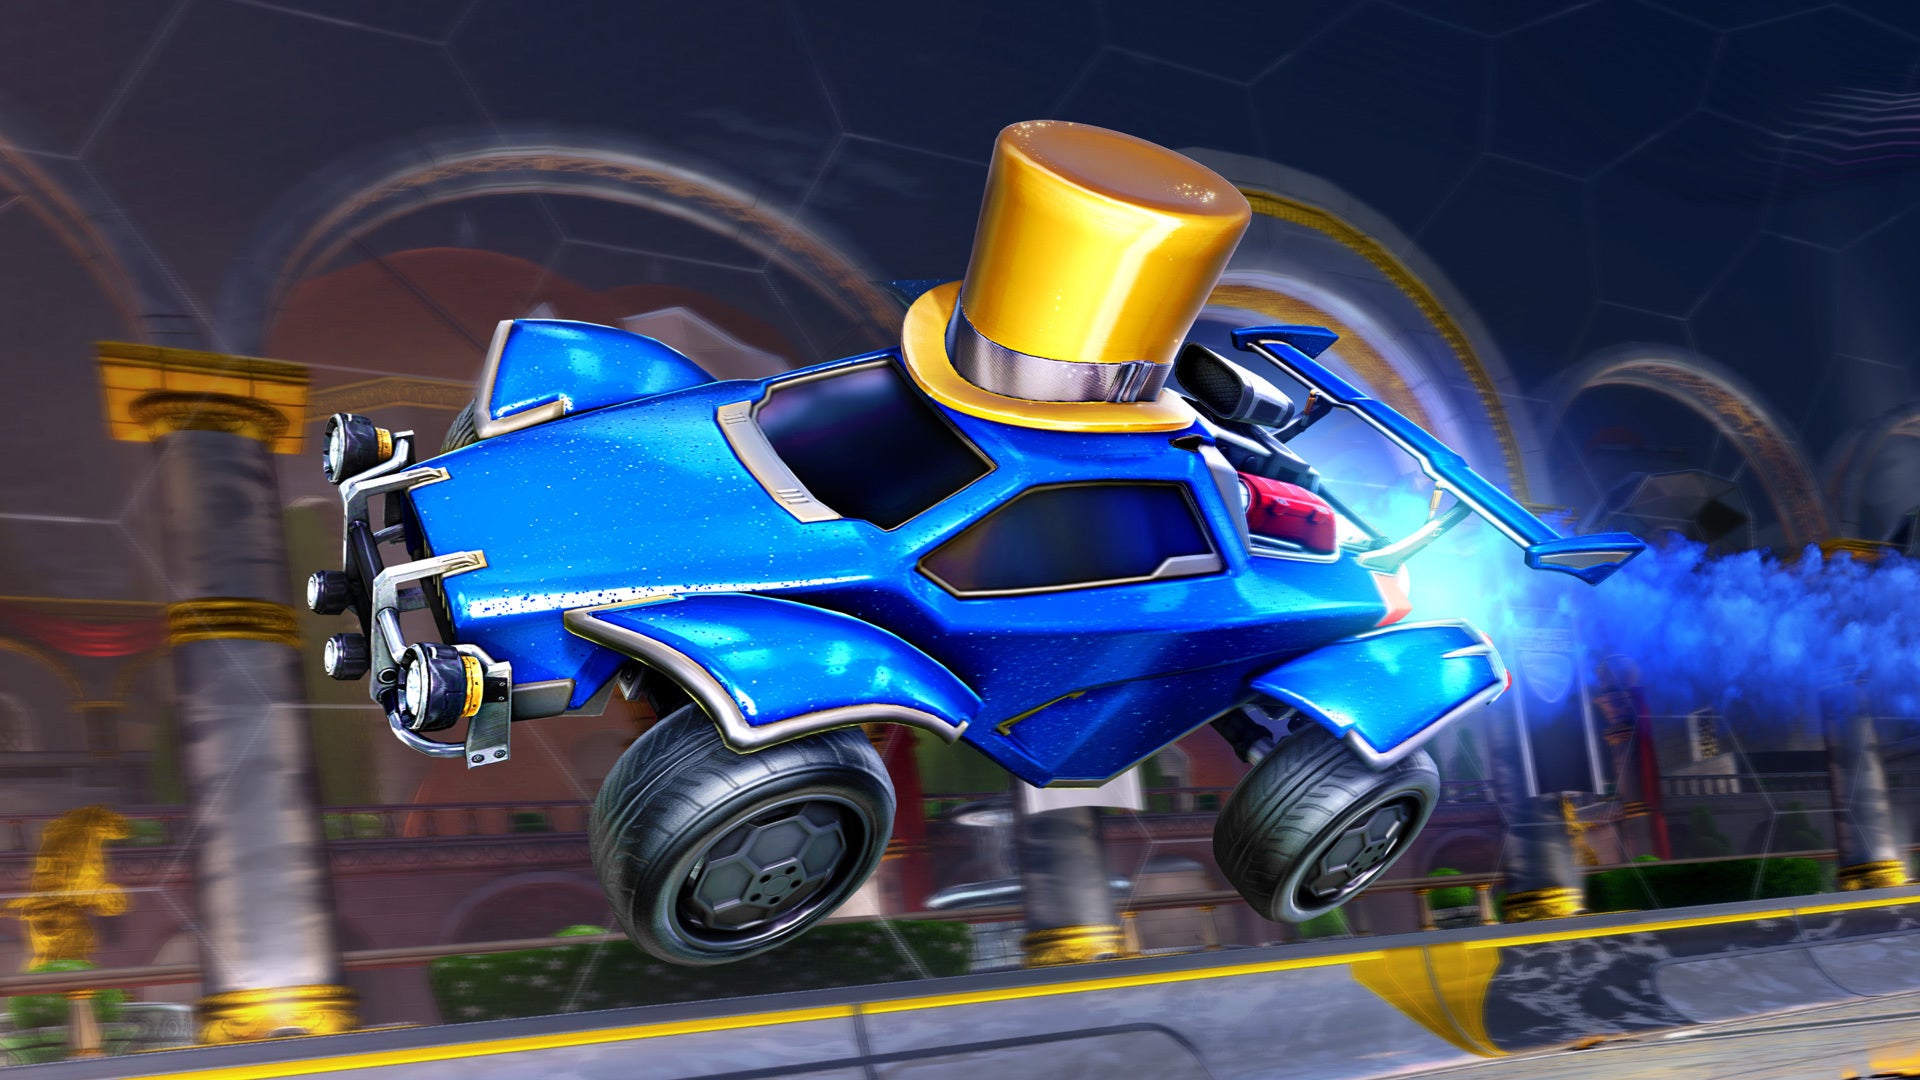 Rocket League's 7th Birthday: 7 Questions with 7 Players Image